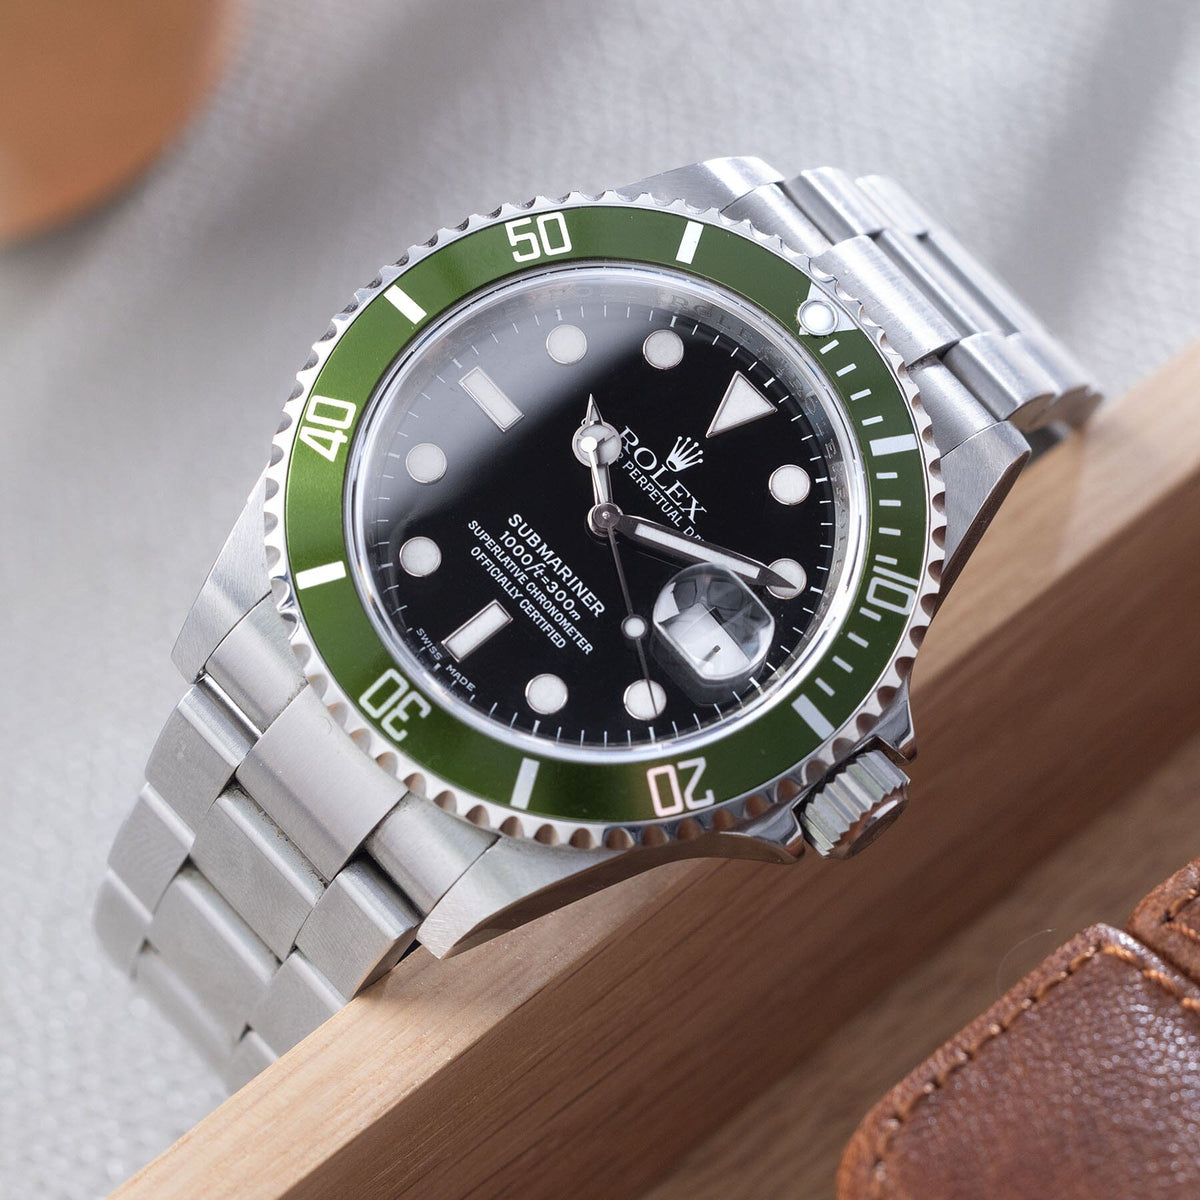 Rolex : Iconic and sporty Submariner 16610 LV of the 50th anniversary, with  green revolving bezel, stainless steel with black dial and seal on the  back, accompanied by box and warranty 